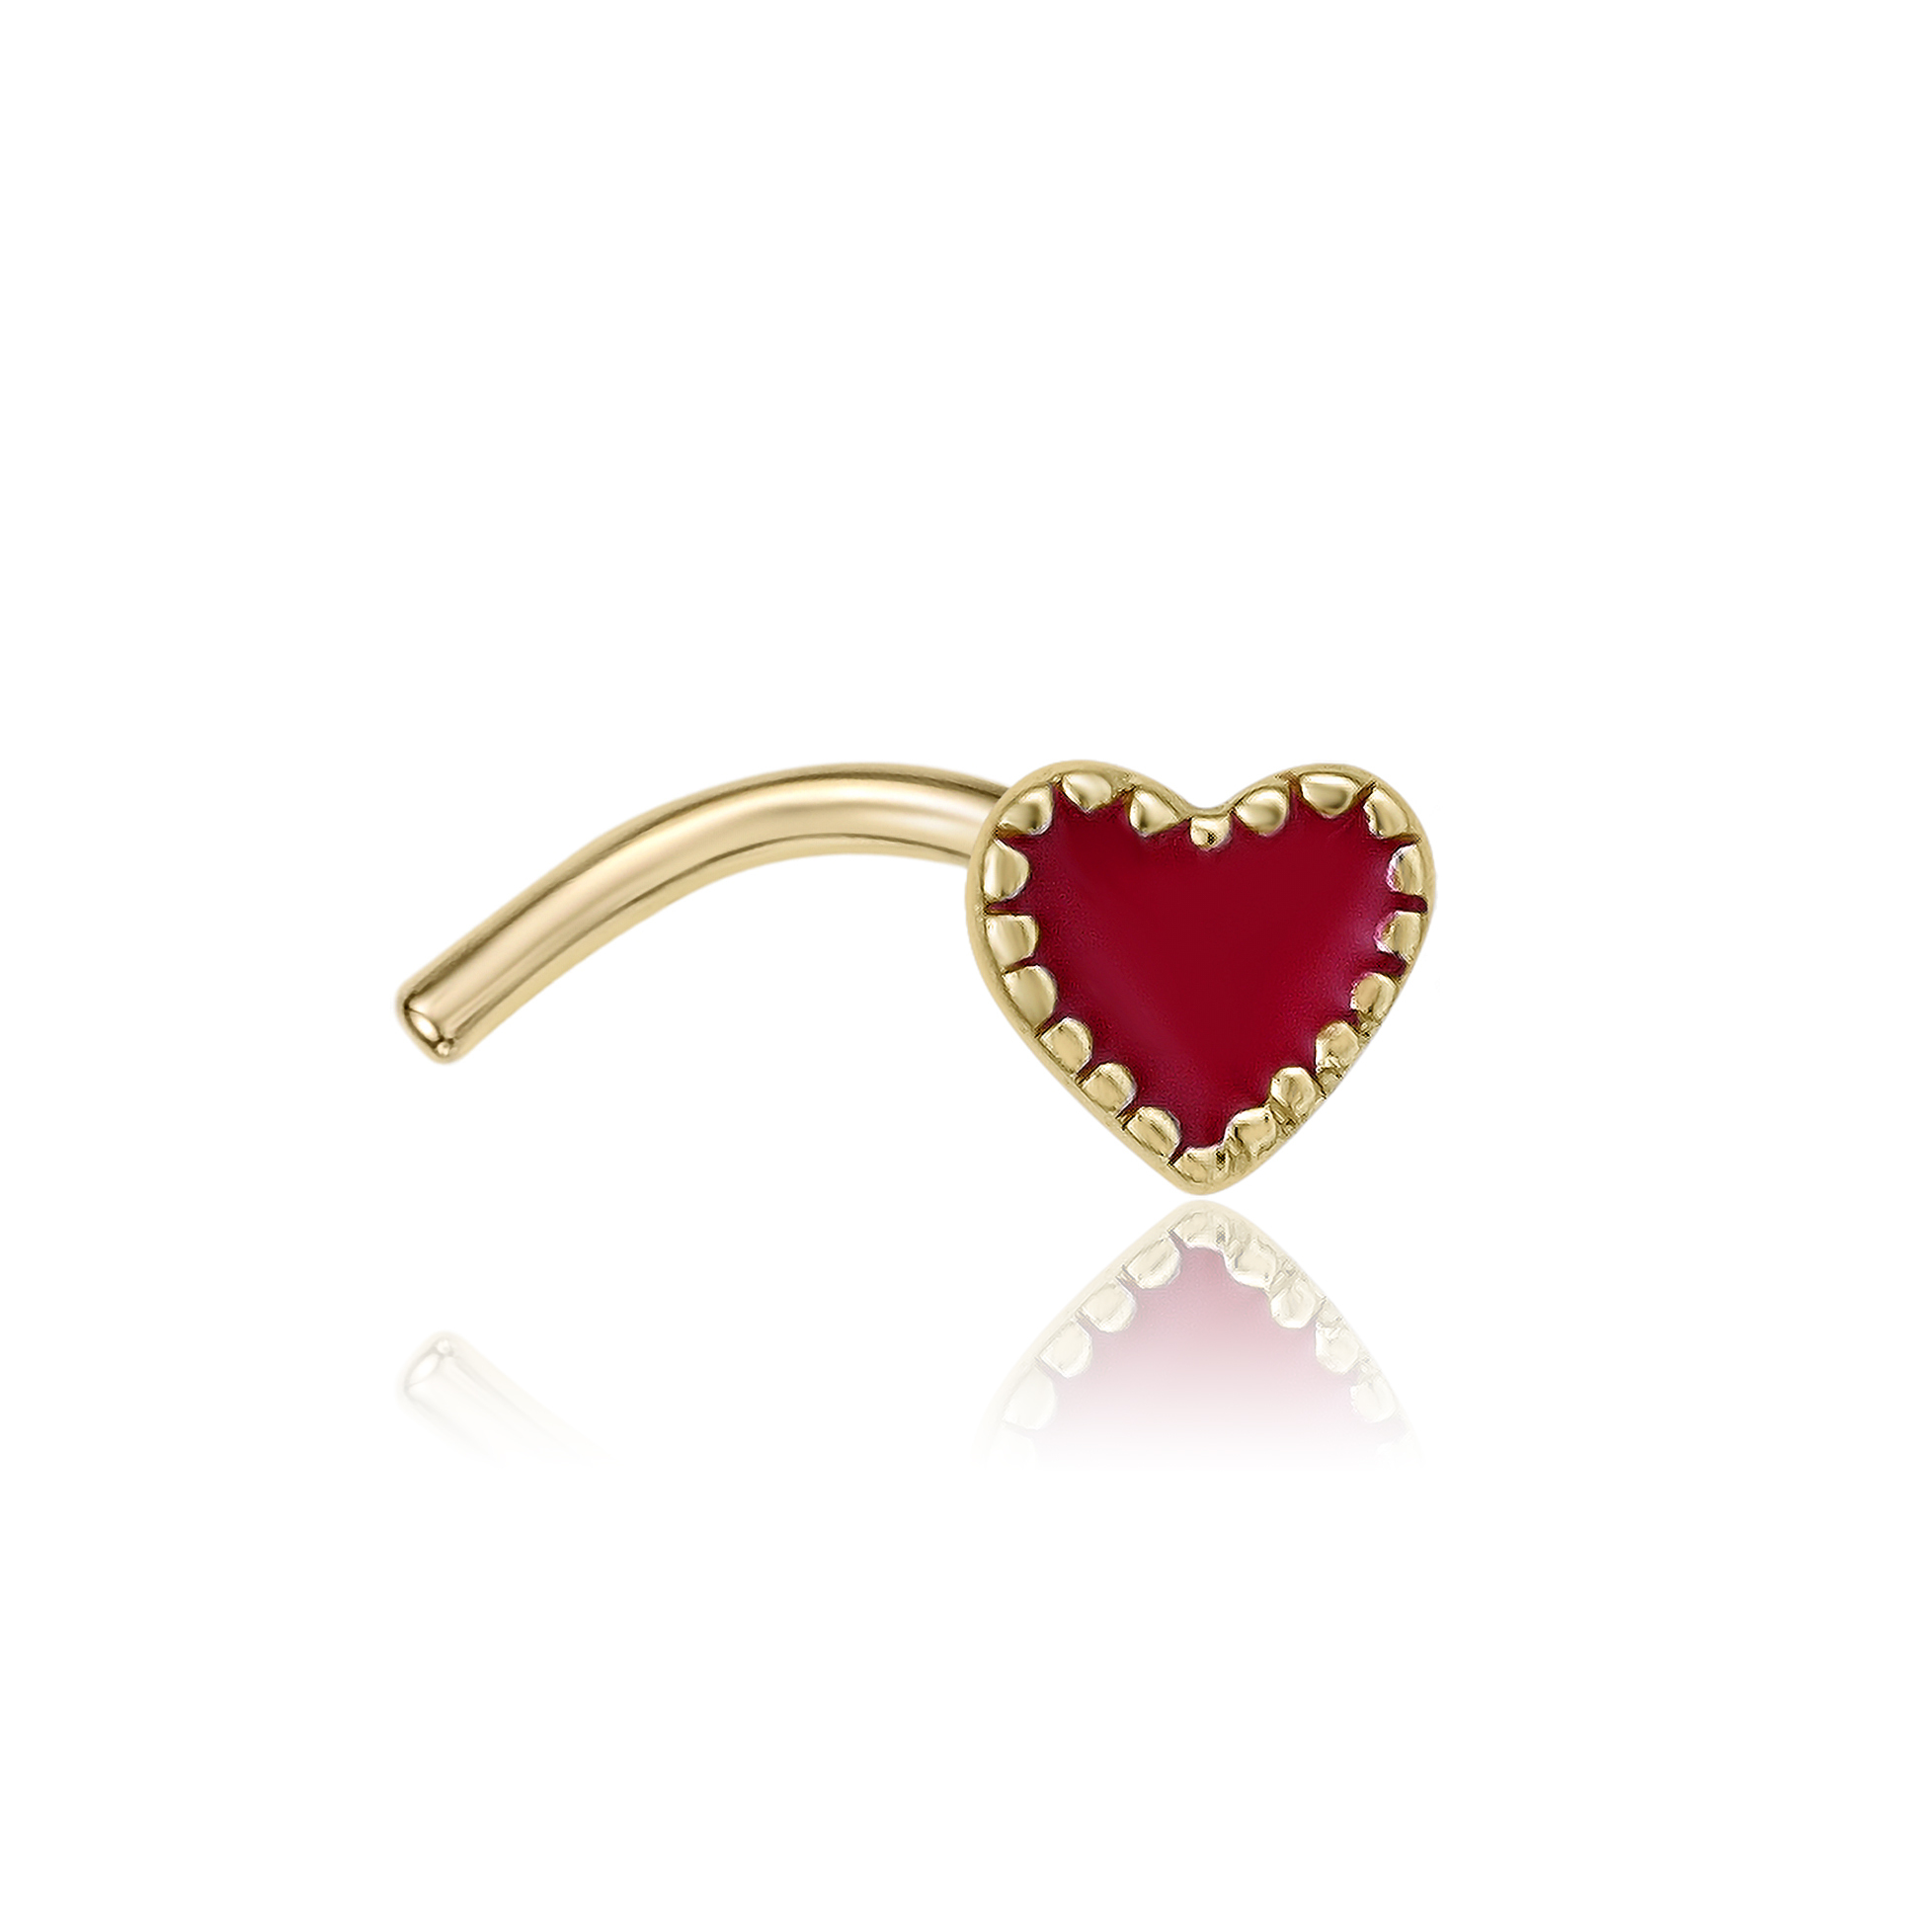 Women's 3.8 MM Red Enamel Heart Curved Nose Ring, 14K Yellow Gold, 20 Gauge  | Lavari Jewelers